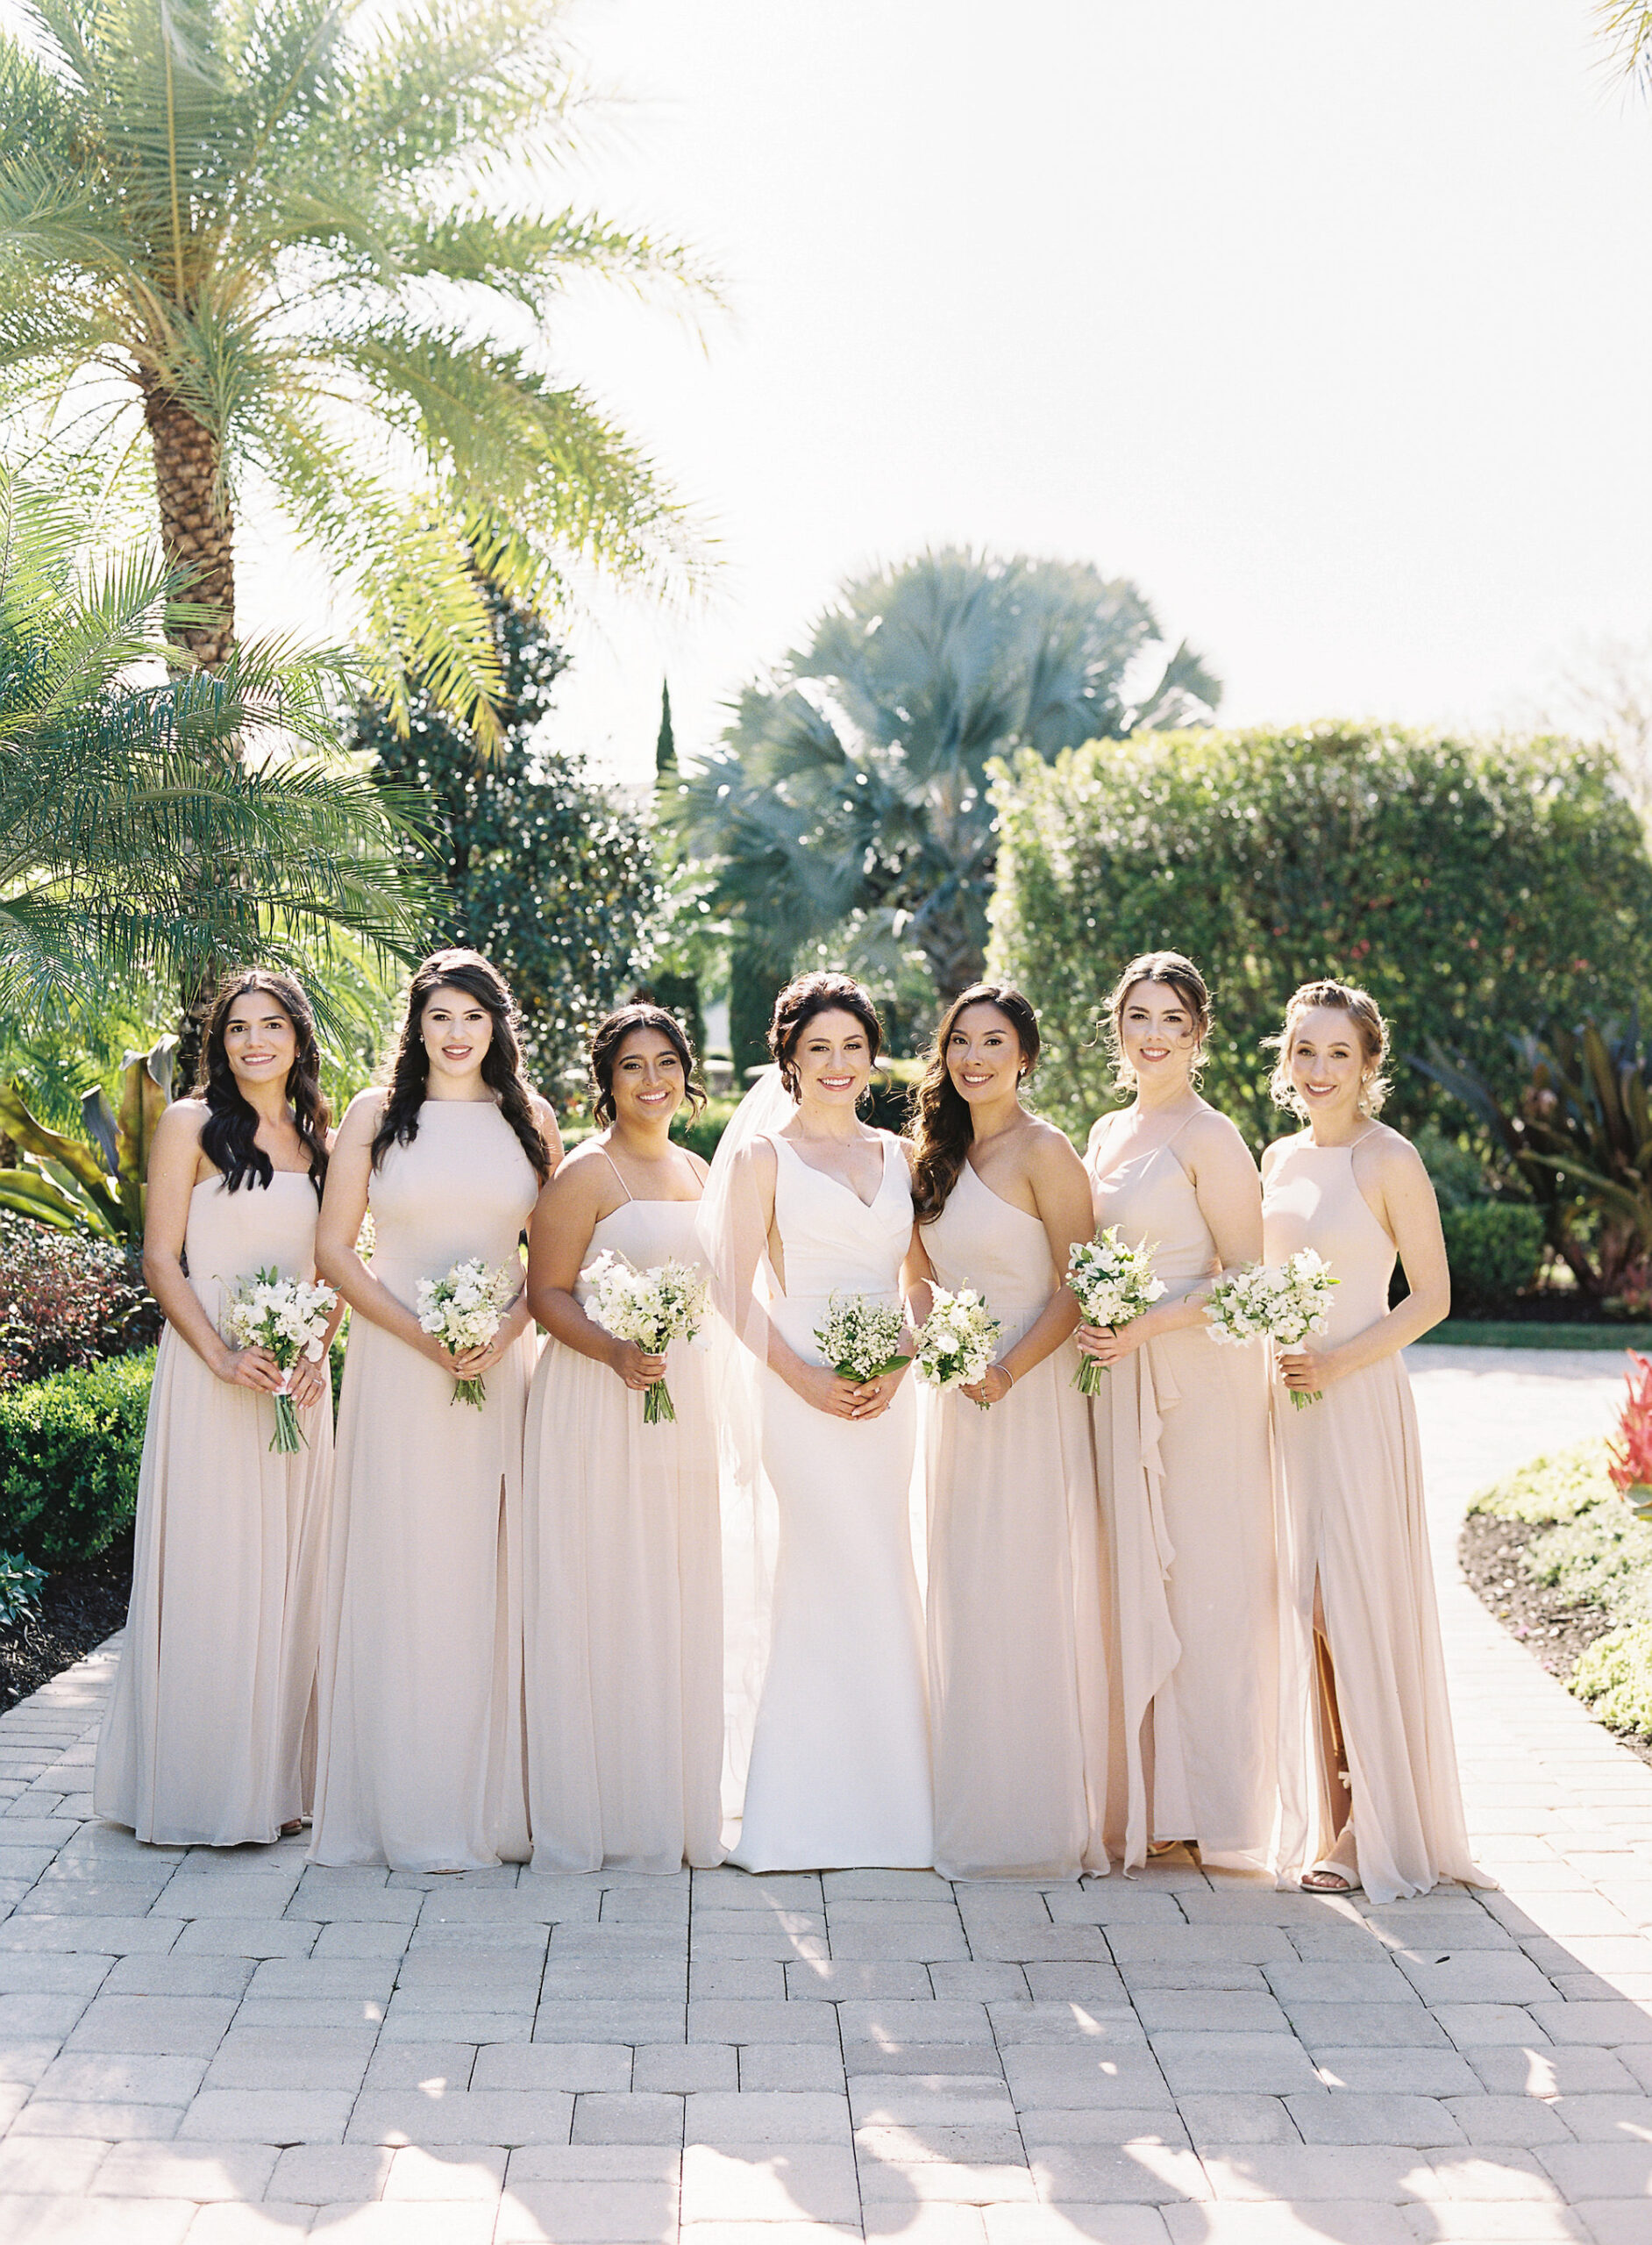 Old Florida Elegant Classic Bride with Bridesmaids in Mix and Match Nude Champagne Dresses | Tampa Bay Wedding Bridesmaid Dresses Bella Bridesmaids